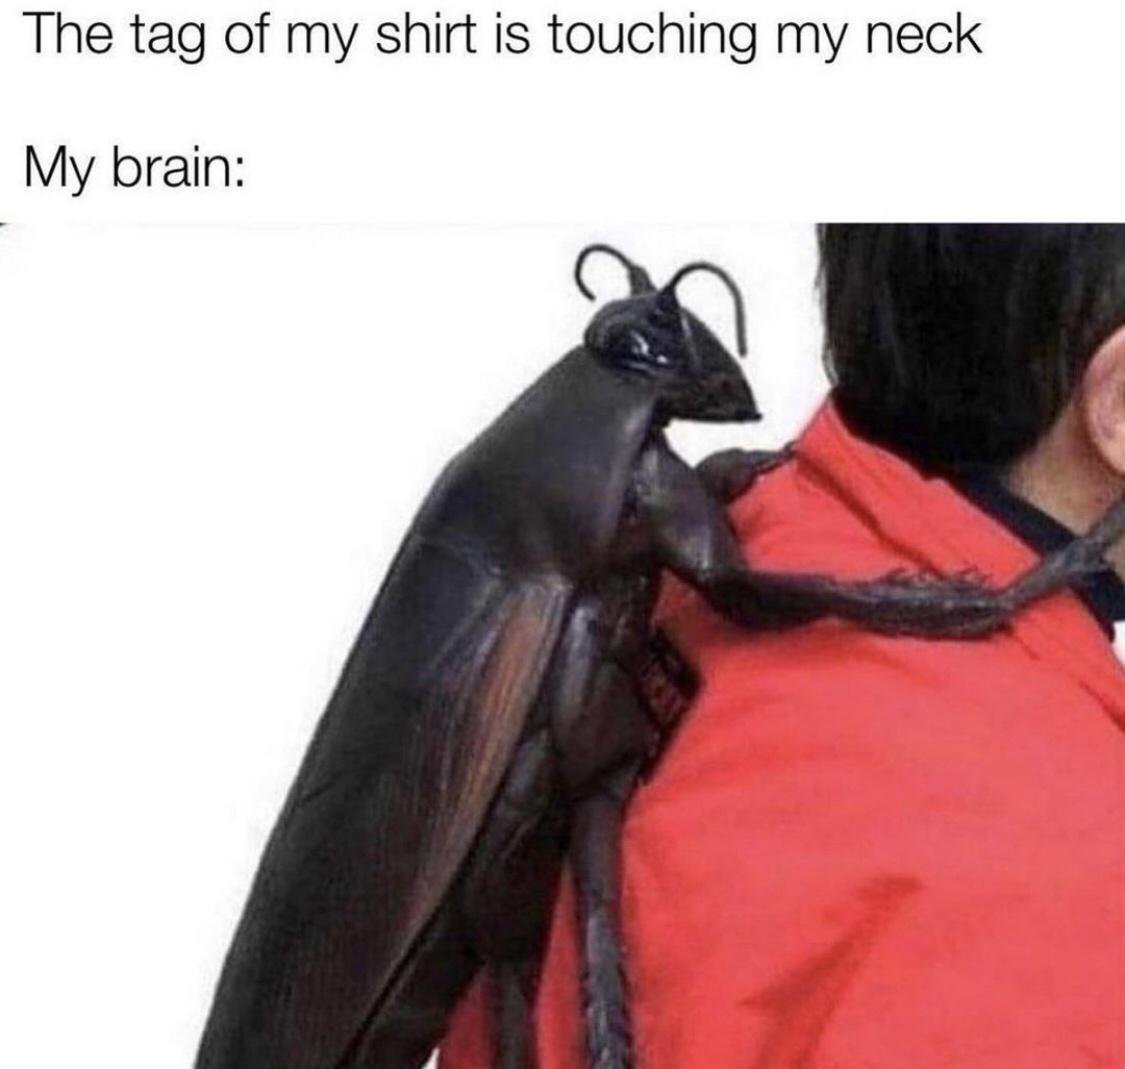 kafka backpack - The tag of my shirt is touching my neck My brain